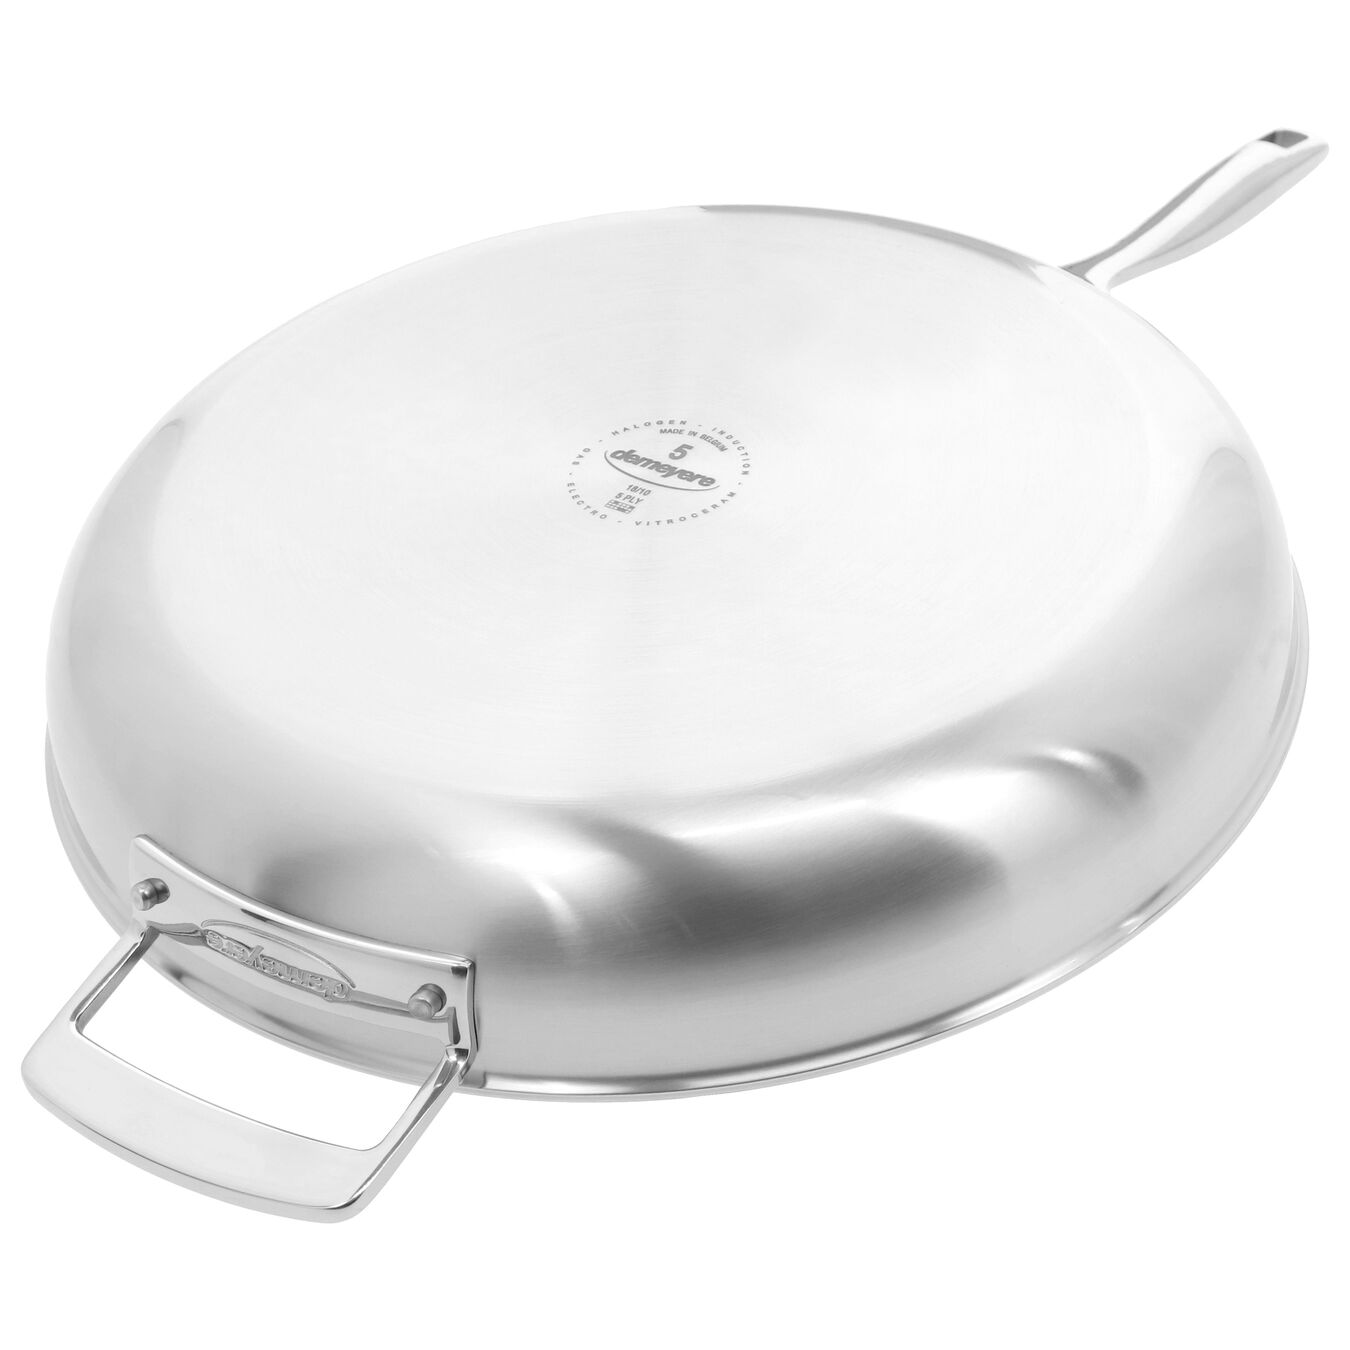 32 cm / 12.5 inch 18/10 Stainless Steel frying pan with lid,,large 4